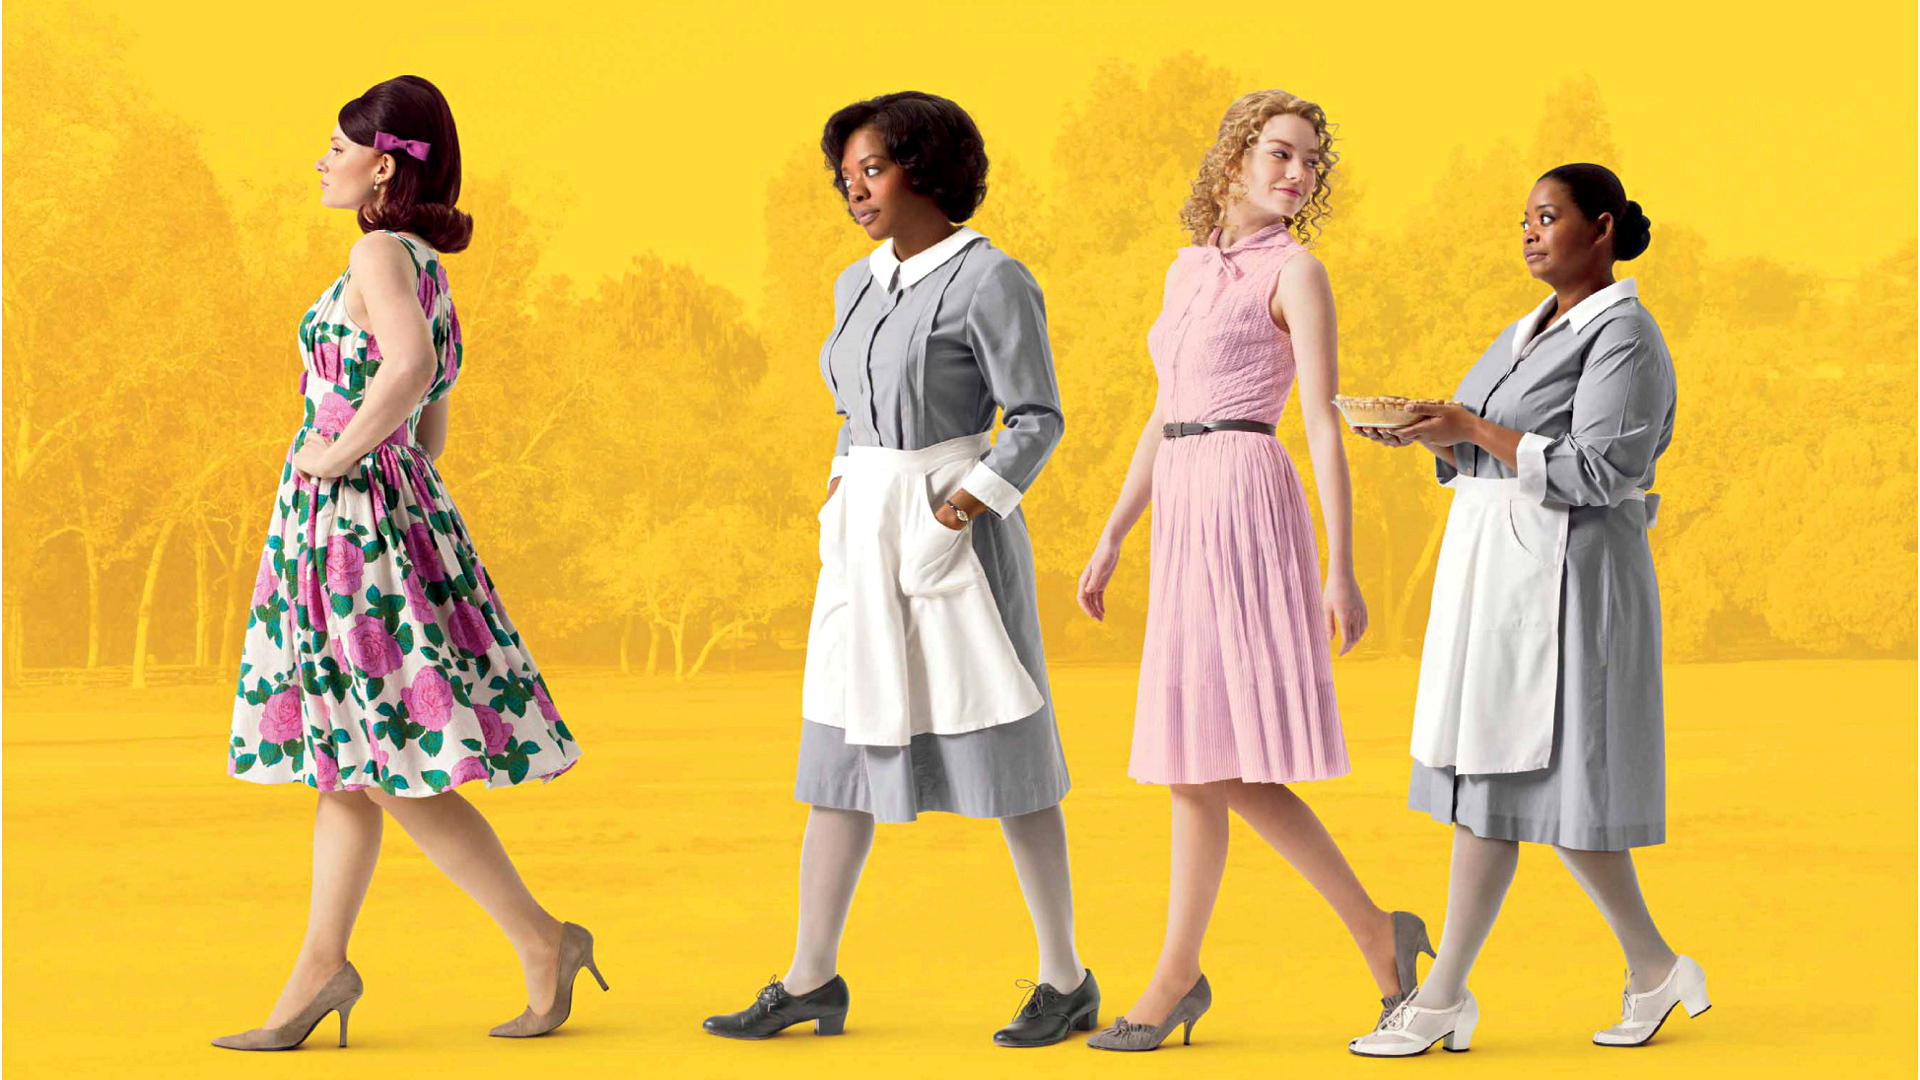 Movie The Help HD Wallpaper | Background Image